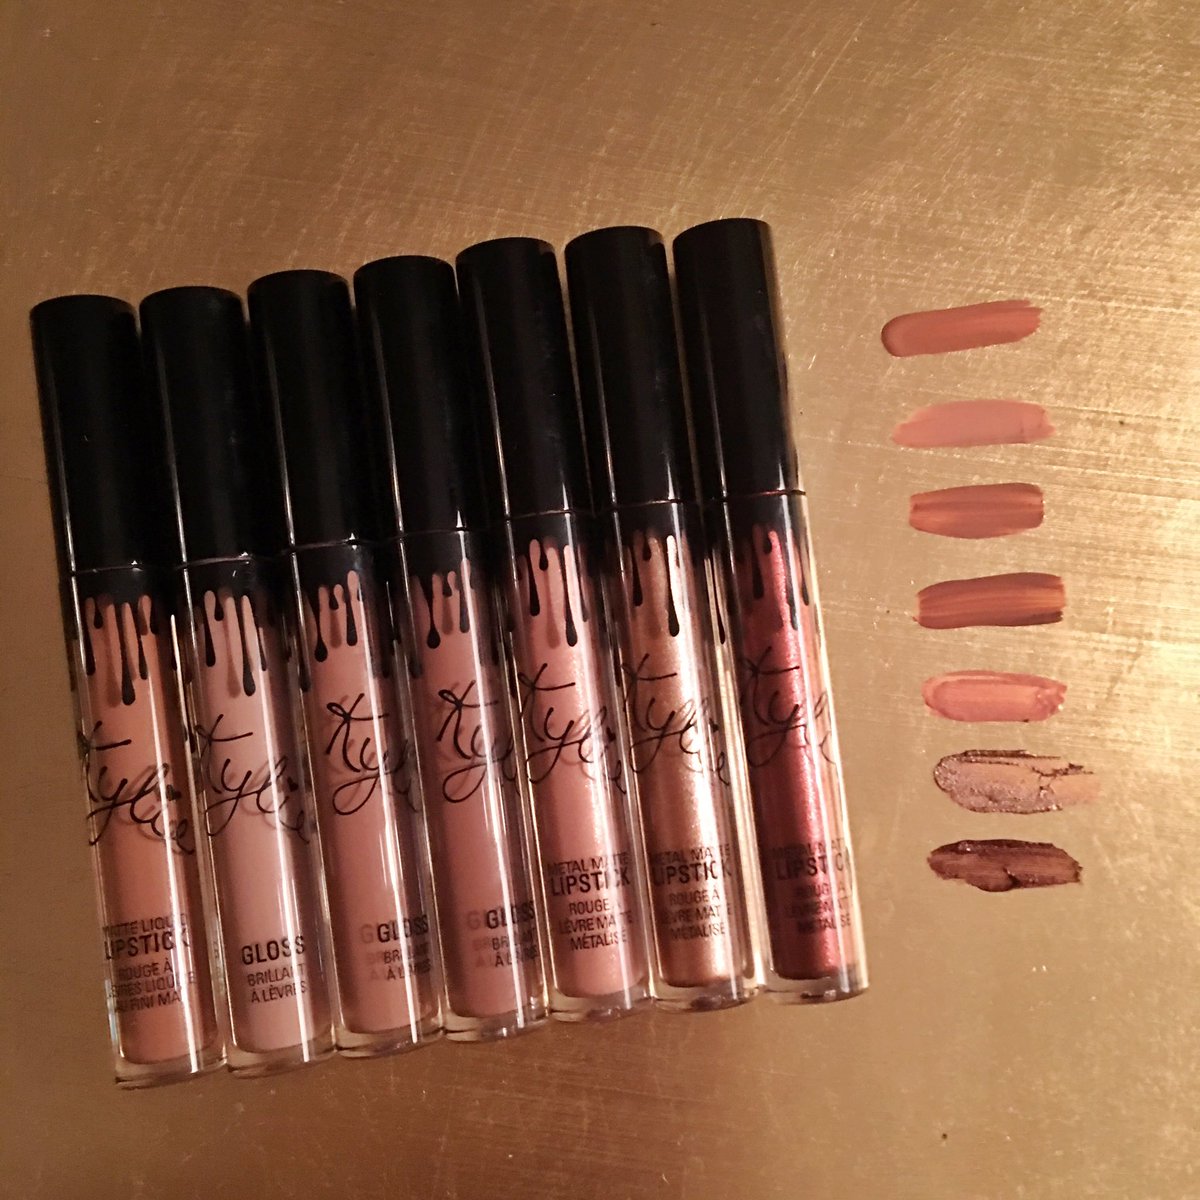 Kylie Cosmetics On Twitter From Left To Right Exposed So